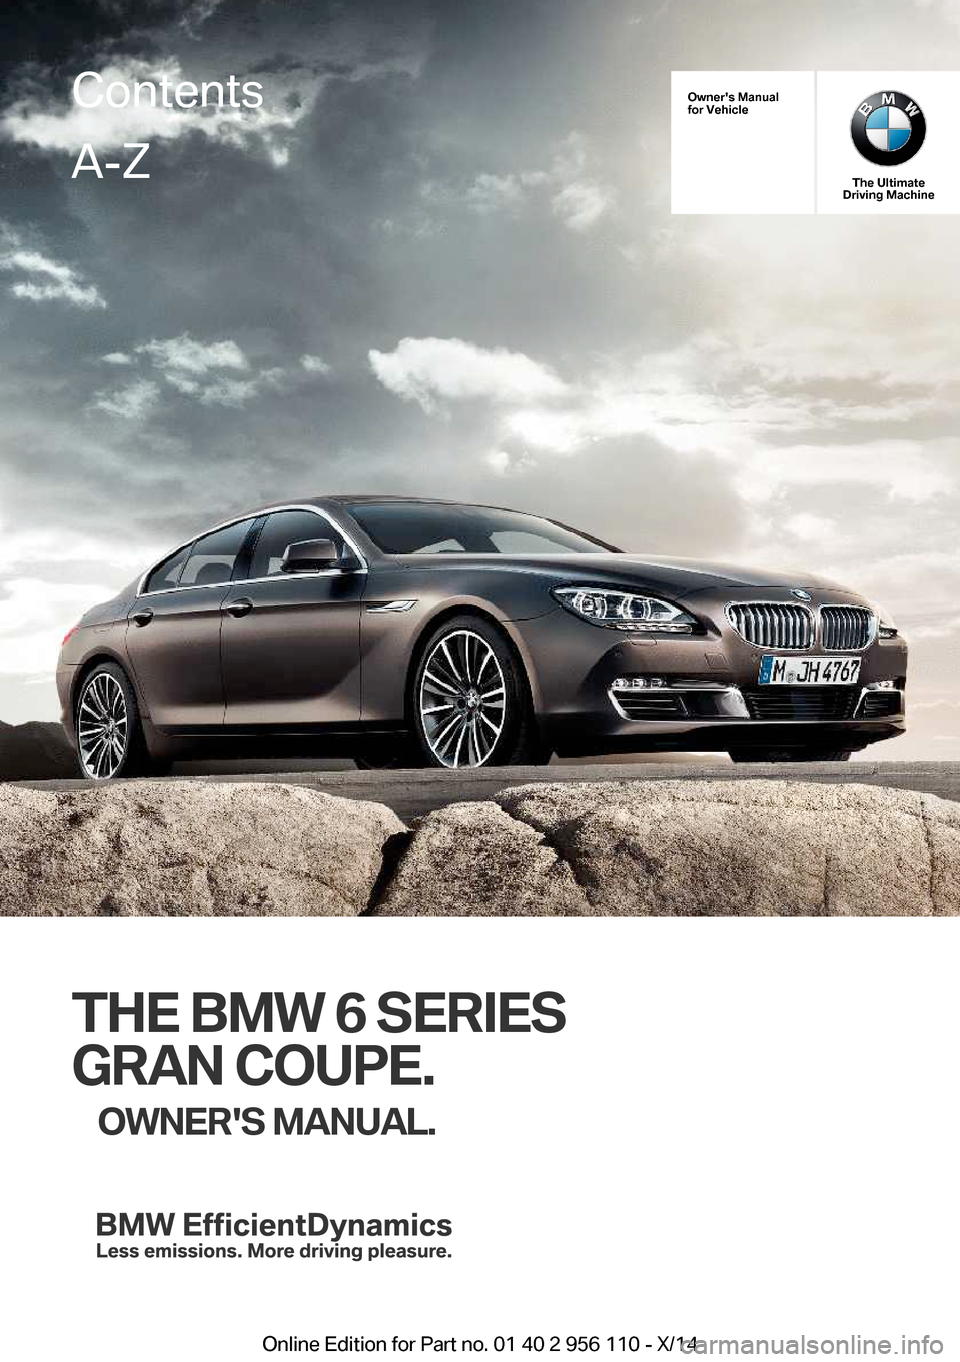 BMW 6 SERIES GRAN COUPE 2014 F06 Owners Manual Owners Manual
for Vehicle
The Ultimate
Driving Machine
THE BMW 6 SERIES
GRAN COUPE. OWNERS MANUAL.
ContentsA-Z
Online Edition for Part no. 01 40 2 956 110 - X/14   